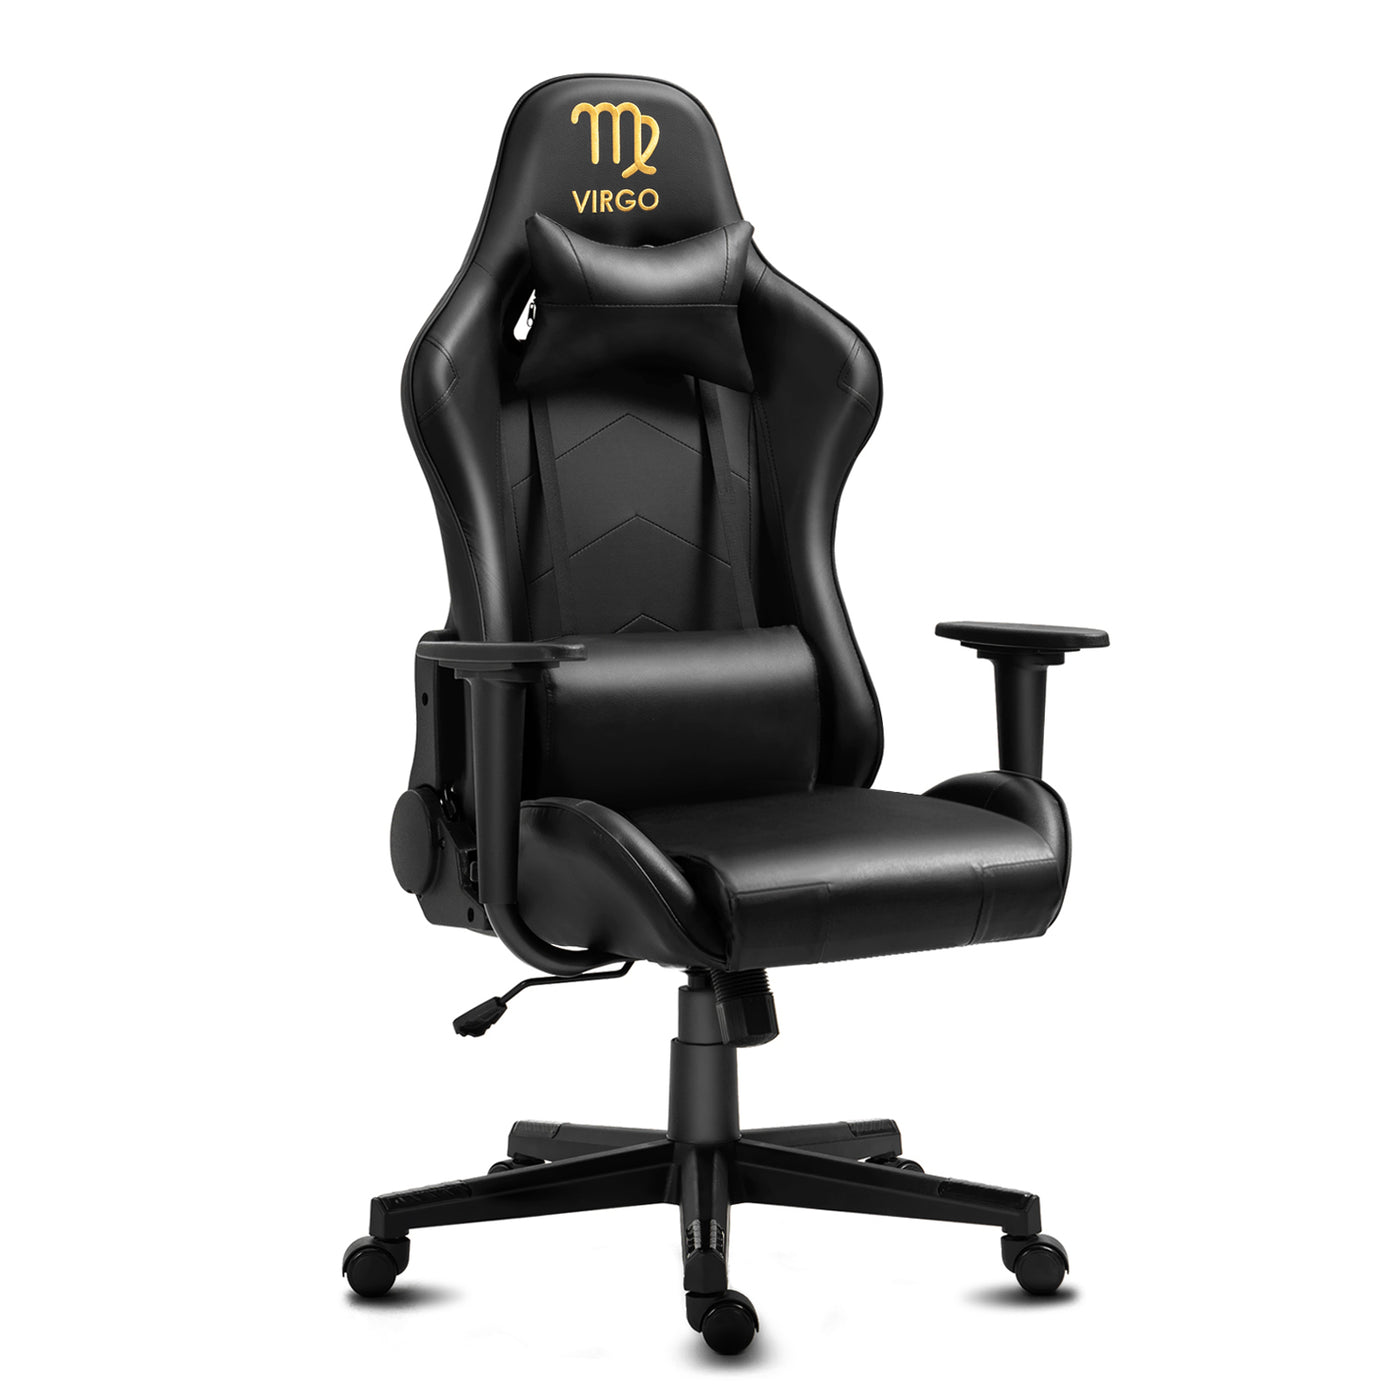 Ergonomic Racing Gaming Chair Swivel Recliner Office Executive Computer Chair